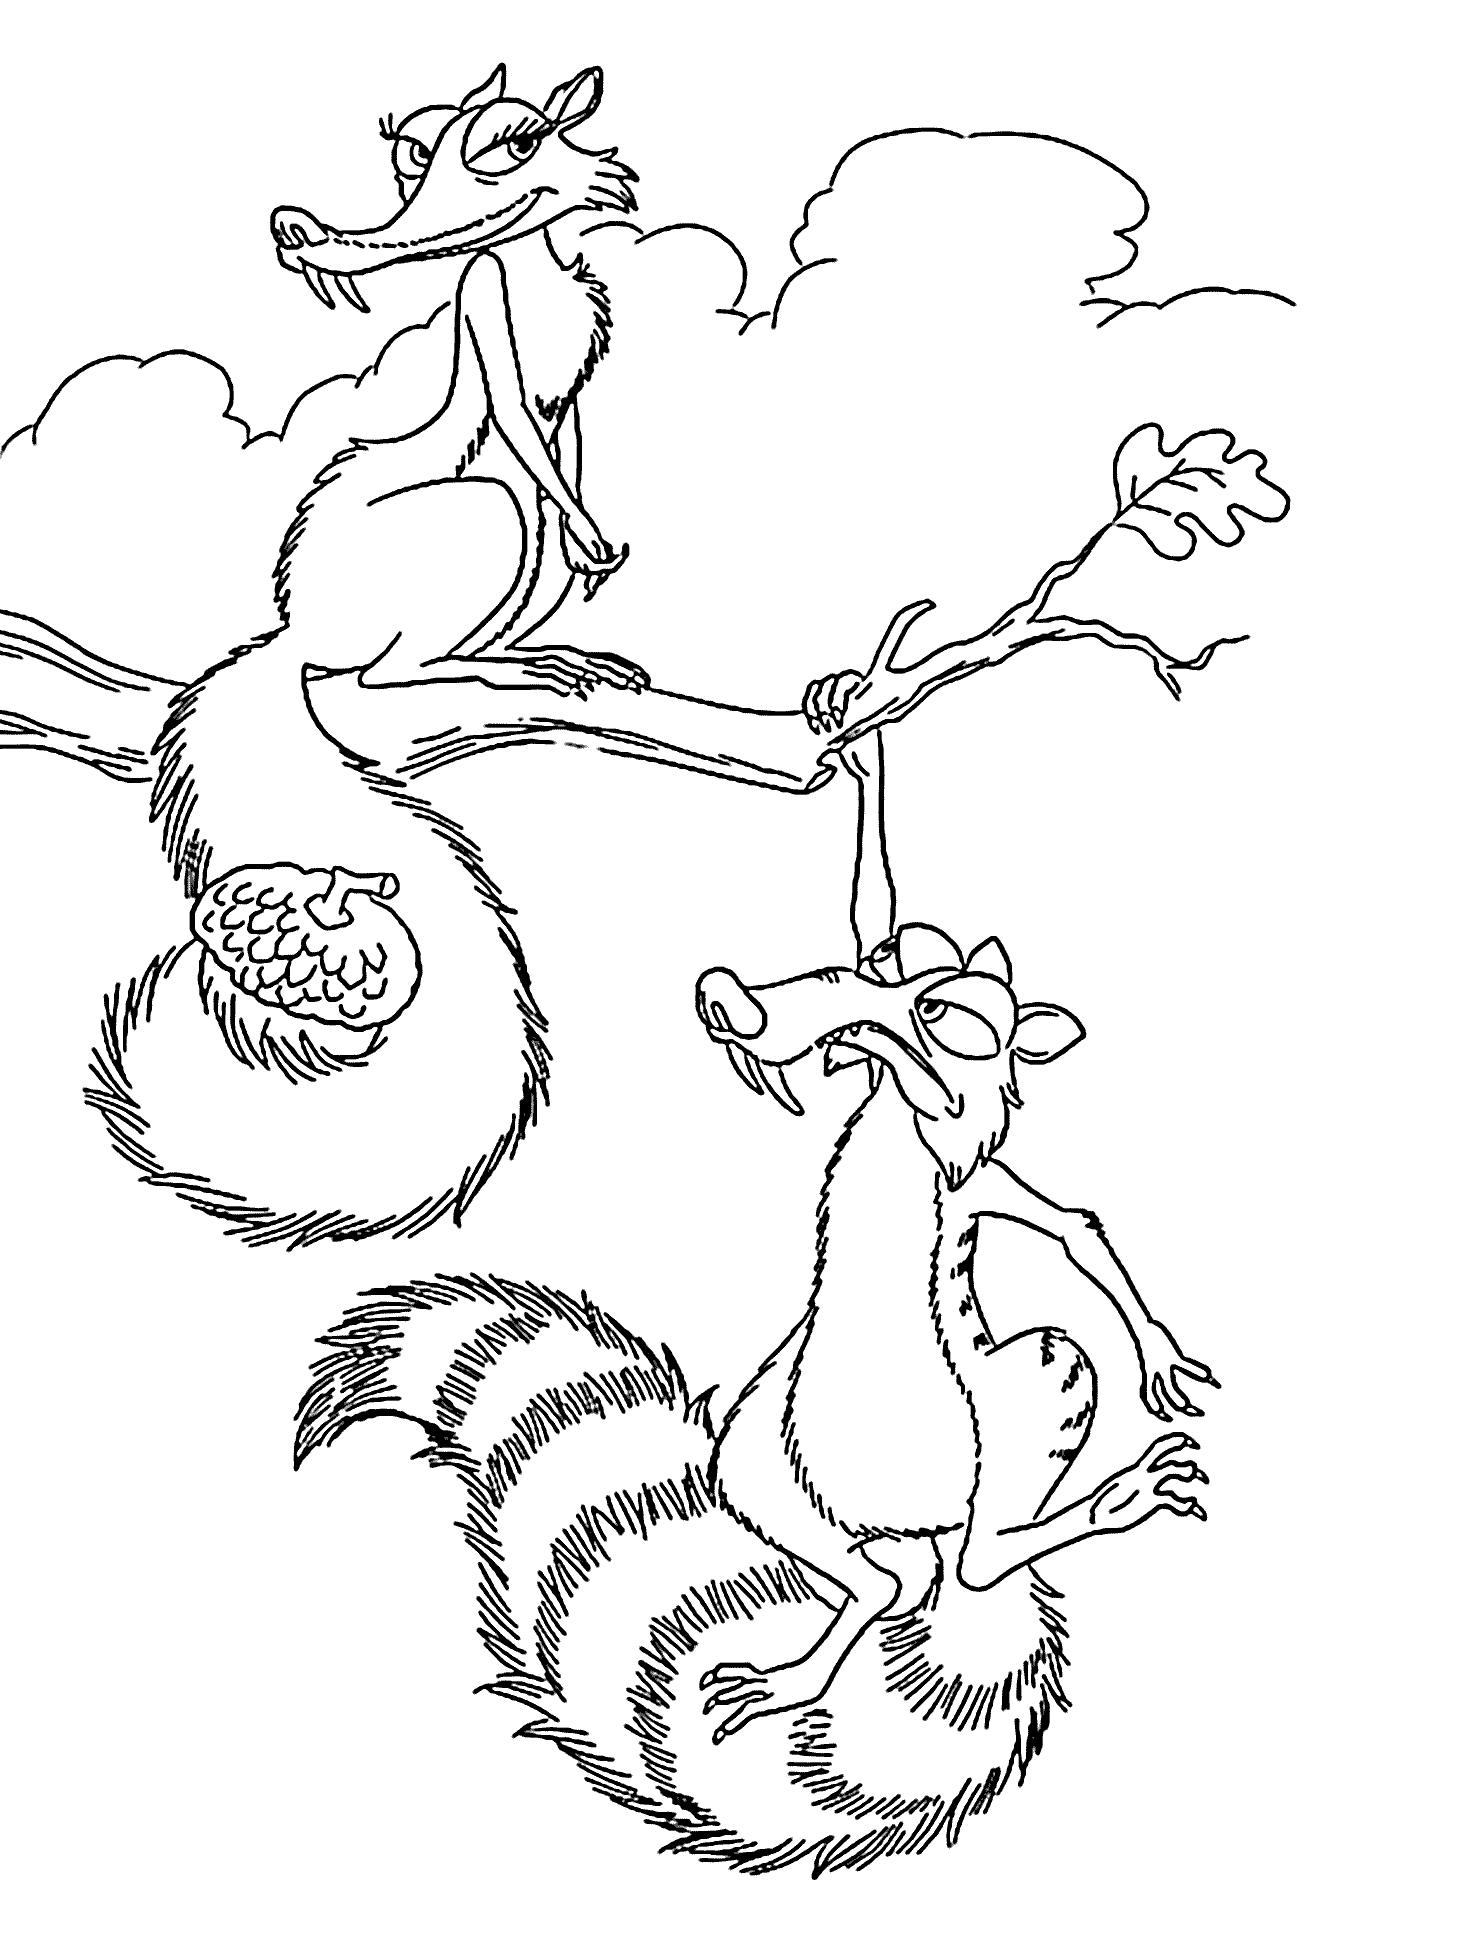 ice age printables ice age coloring pages coloringpagesabccom age ice printables 